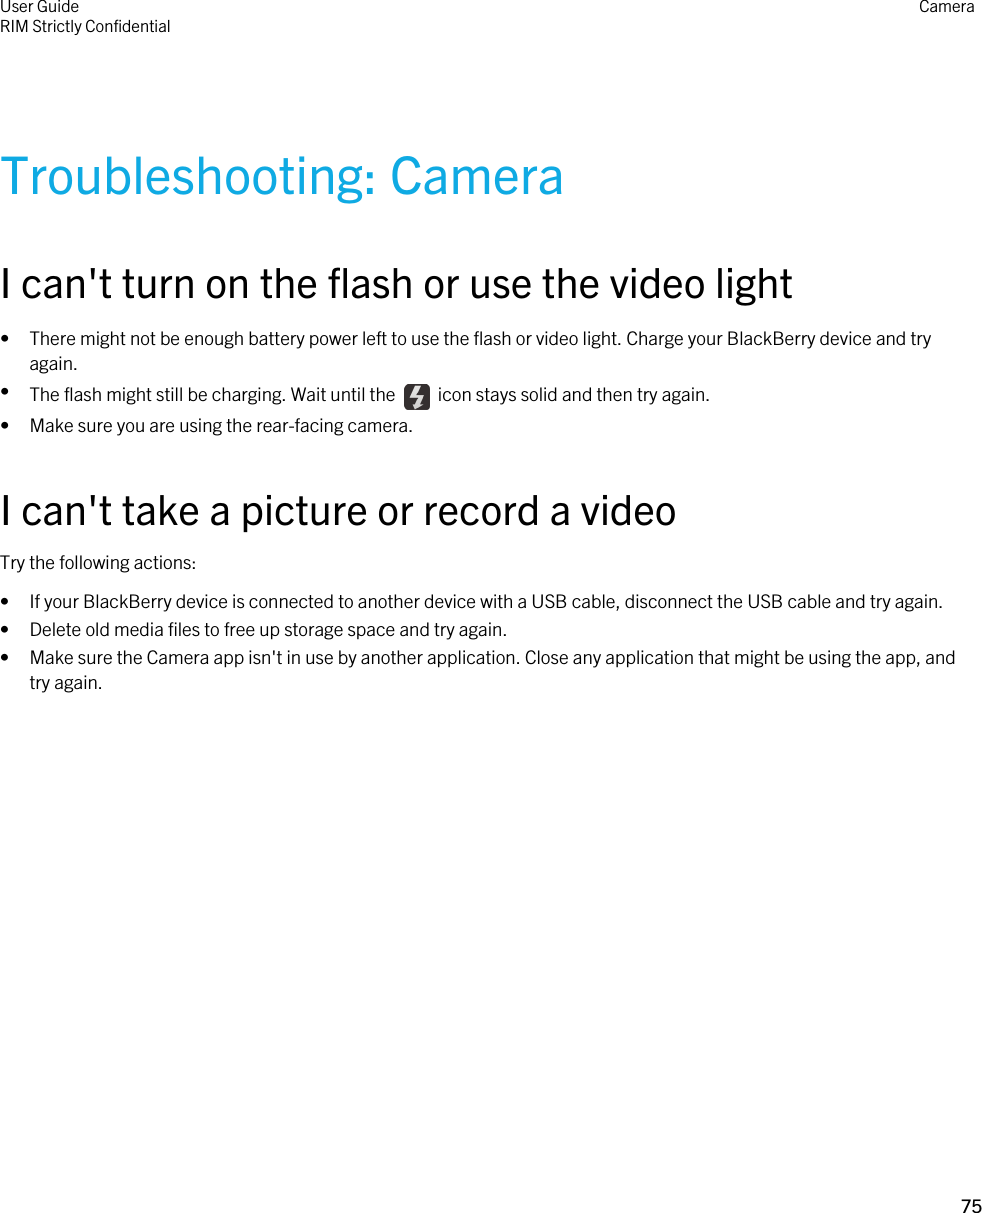 Troubleshooting: CameraI can&apos;t turn on the flash or use the video light• There might not be enough battery power left to use the flash or video light. Charge your BlackBerry device and try again.•The flash might still be charging. Wait until the    icon stays solid and then try again.• Make sure you are using the rear-facing camera.I can&apos;t take a picture or record a videoTry the following actions:• If your BlackBerry device is connected to another device with a USB cable, disconnect the USB cable and try again.• Delete old media files to free up storage space and try again.• Make sure the Camera app isn&apos;t in use by another application. Close any application that might be using the app, and try again.User GuideRIM Strictly ConfidentialCamera75 